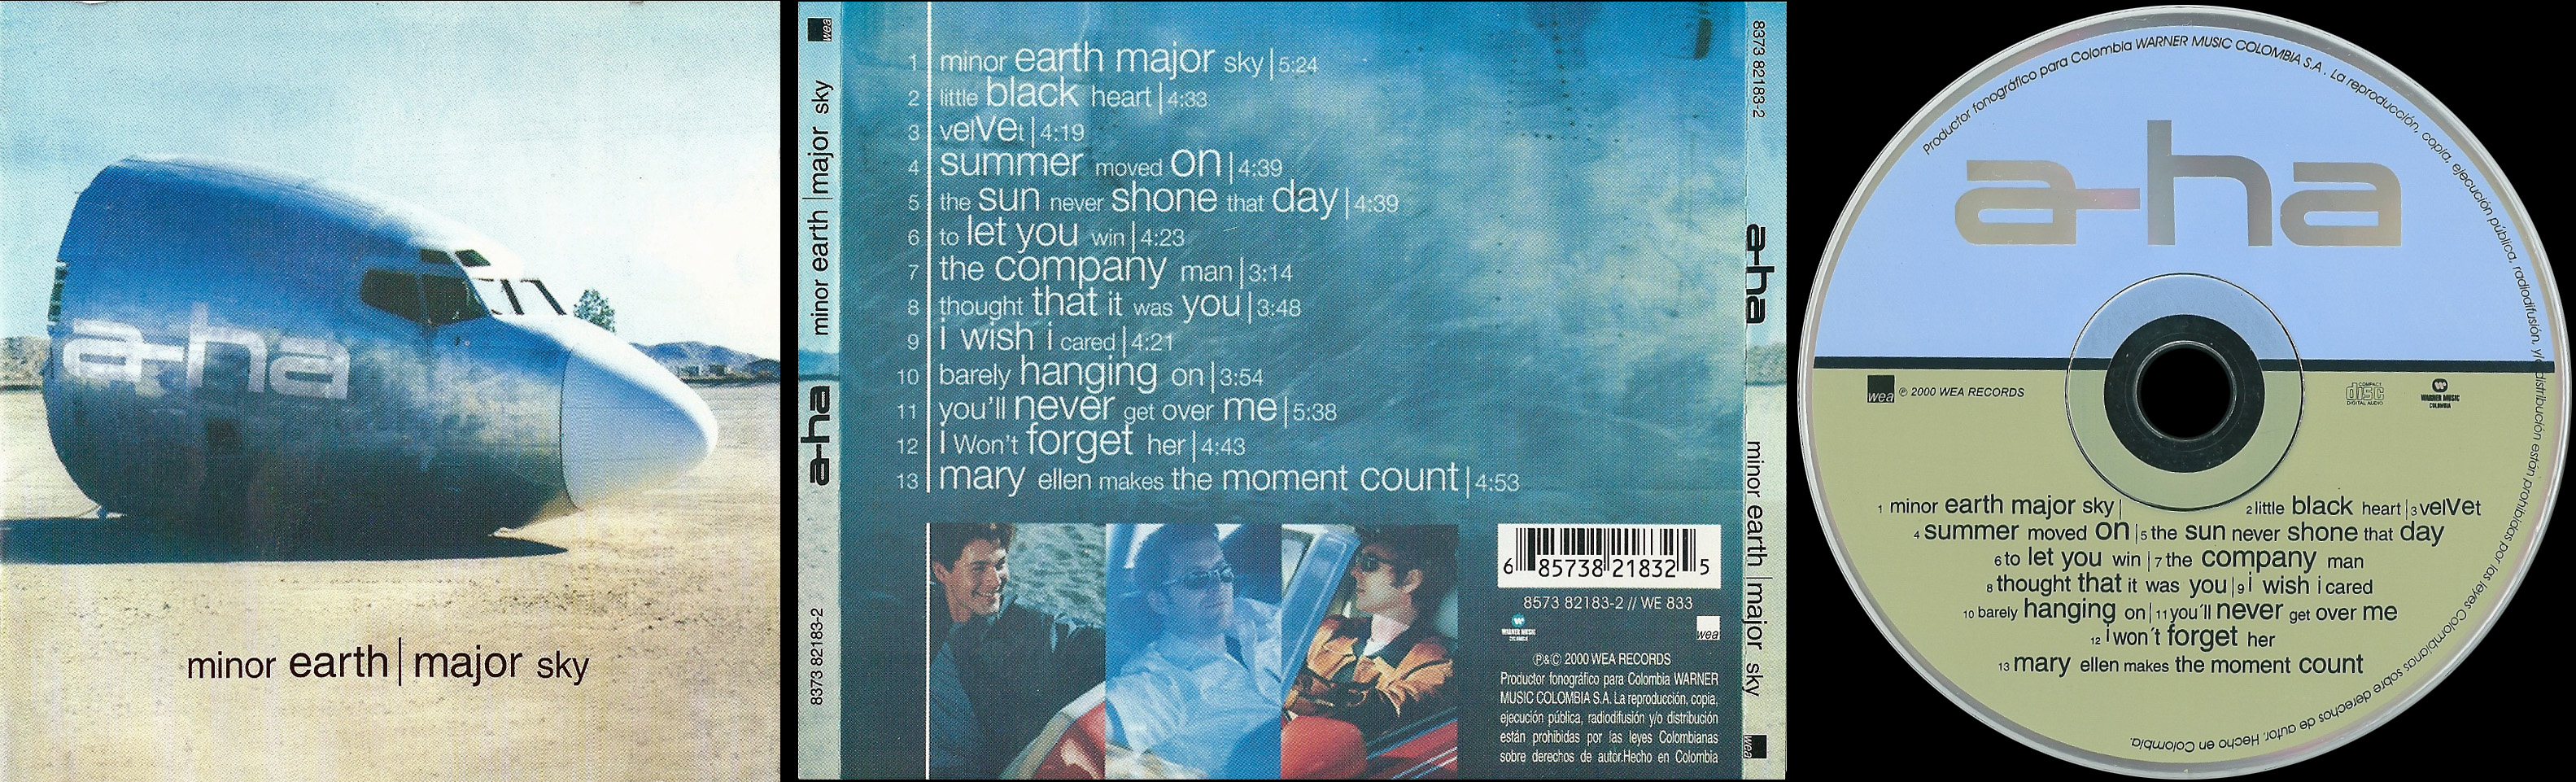 Minor Earth Major Sky Colombia CD - click to enlarge